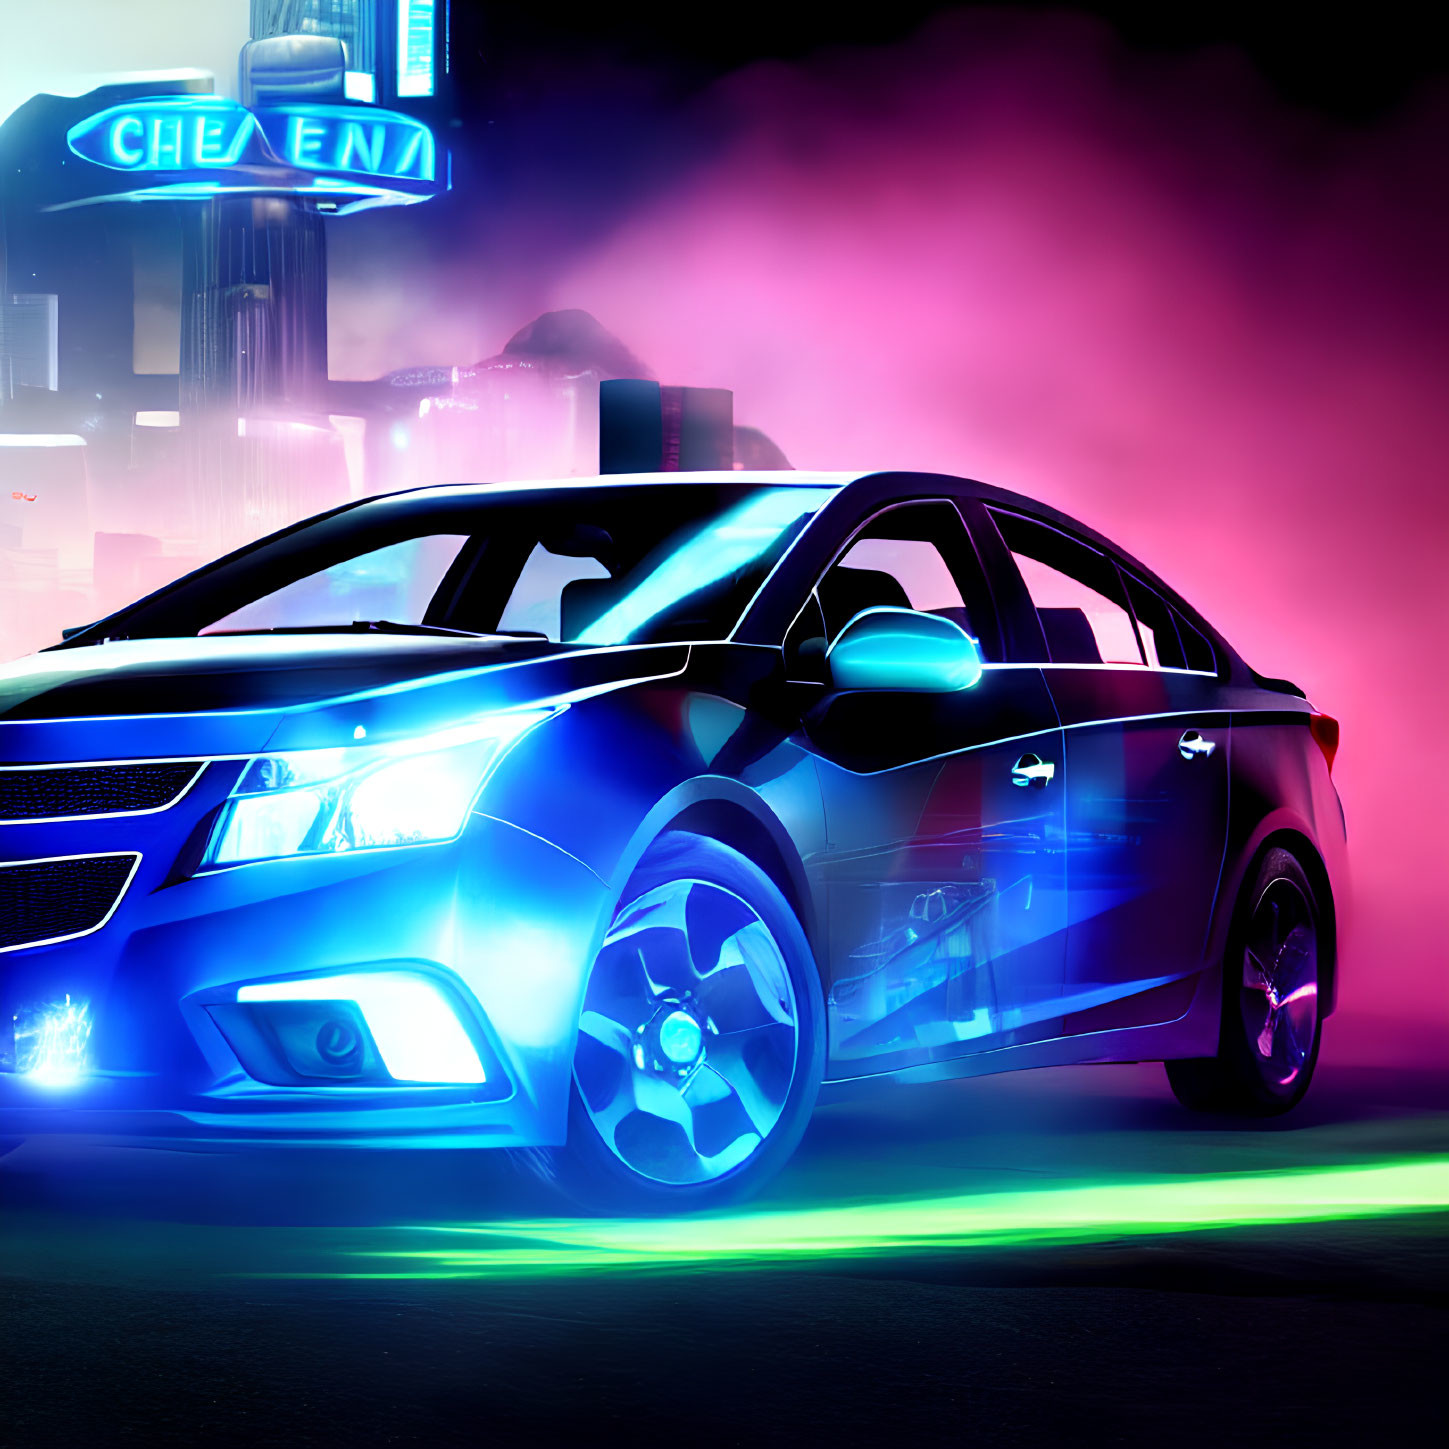 Neon-lit urban scene with sleek car and colorful signage